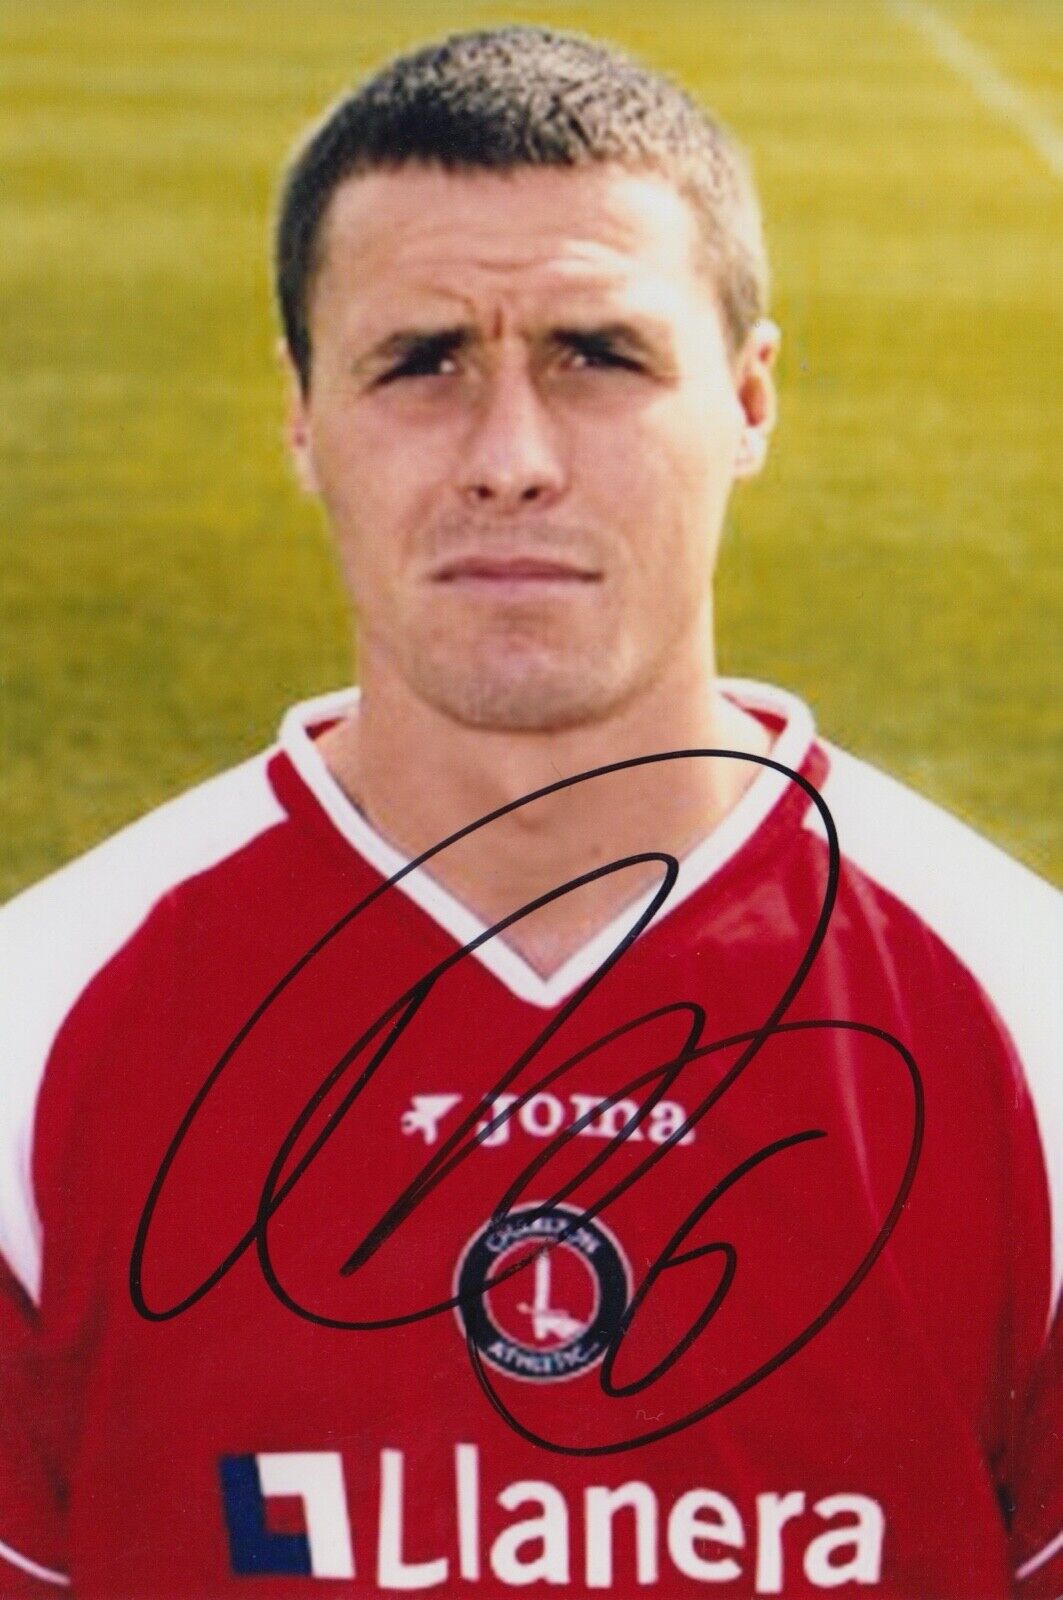 PADDY MCCARTHY HAND SIGNED 6X4 Photo Poster painting - FOOTBALL AUTOGRAPH - CHARLTON ATHLETIC.